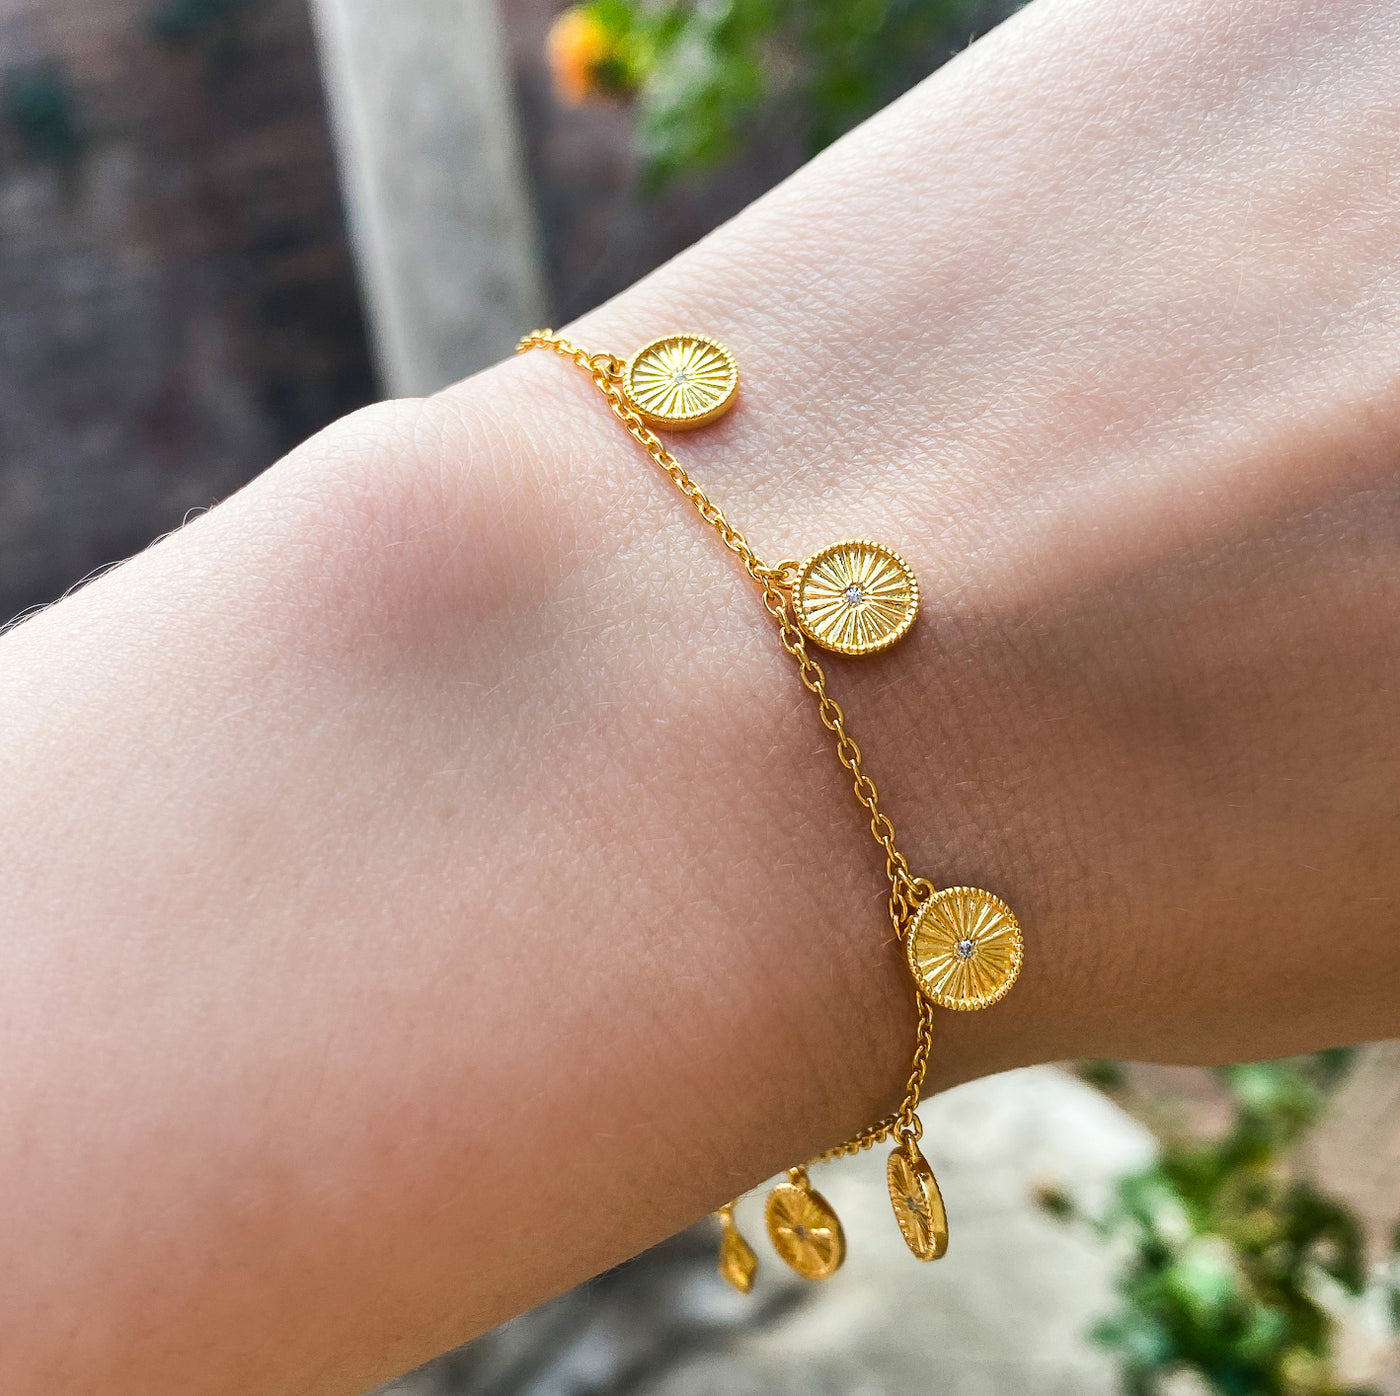 Gold plated sterling Silver bracelet with engraved coin hanging charms featuring CZ crystals